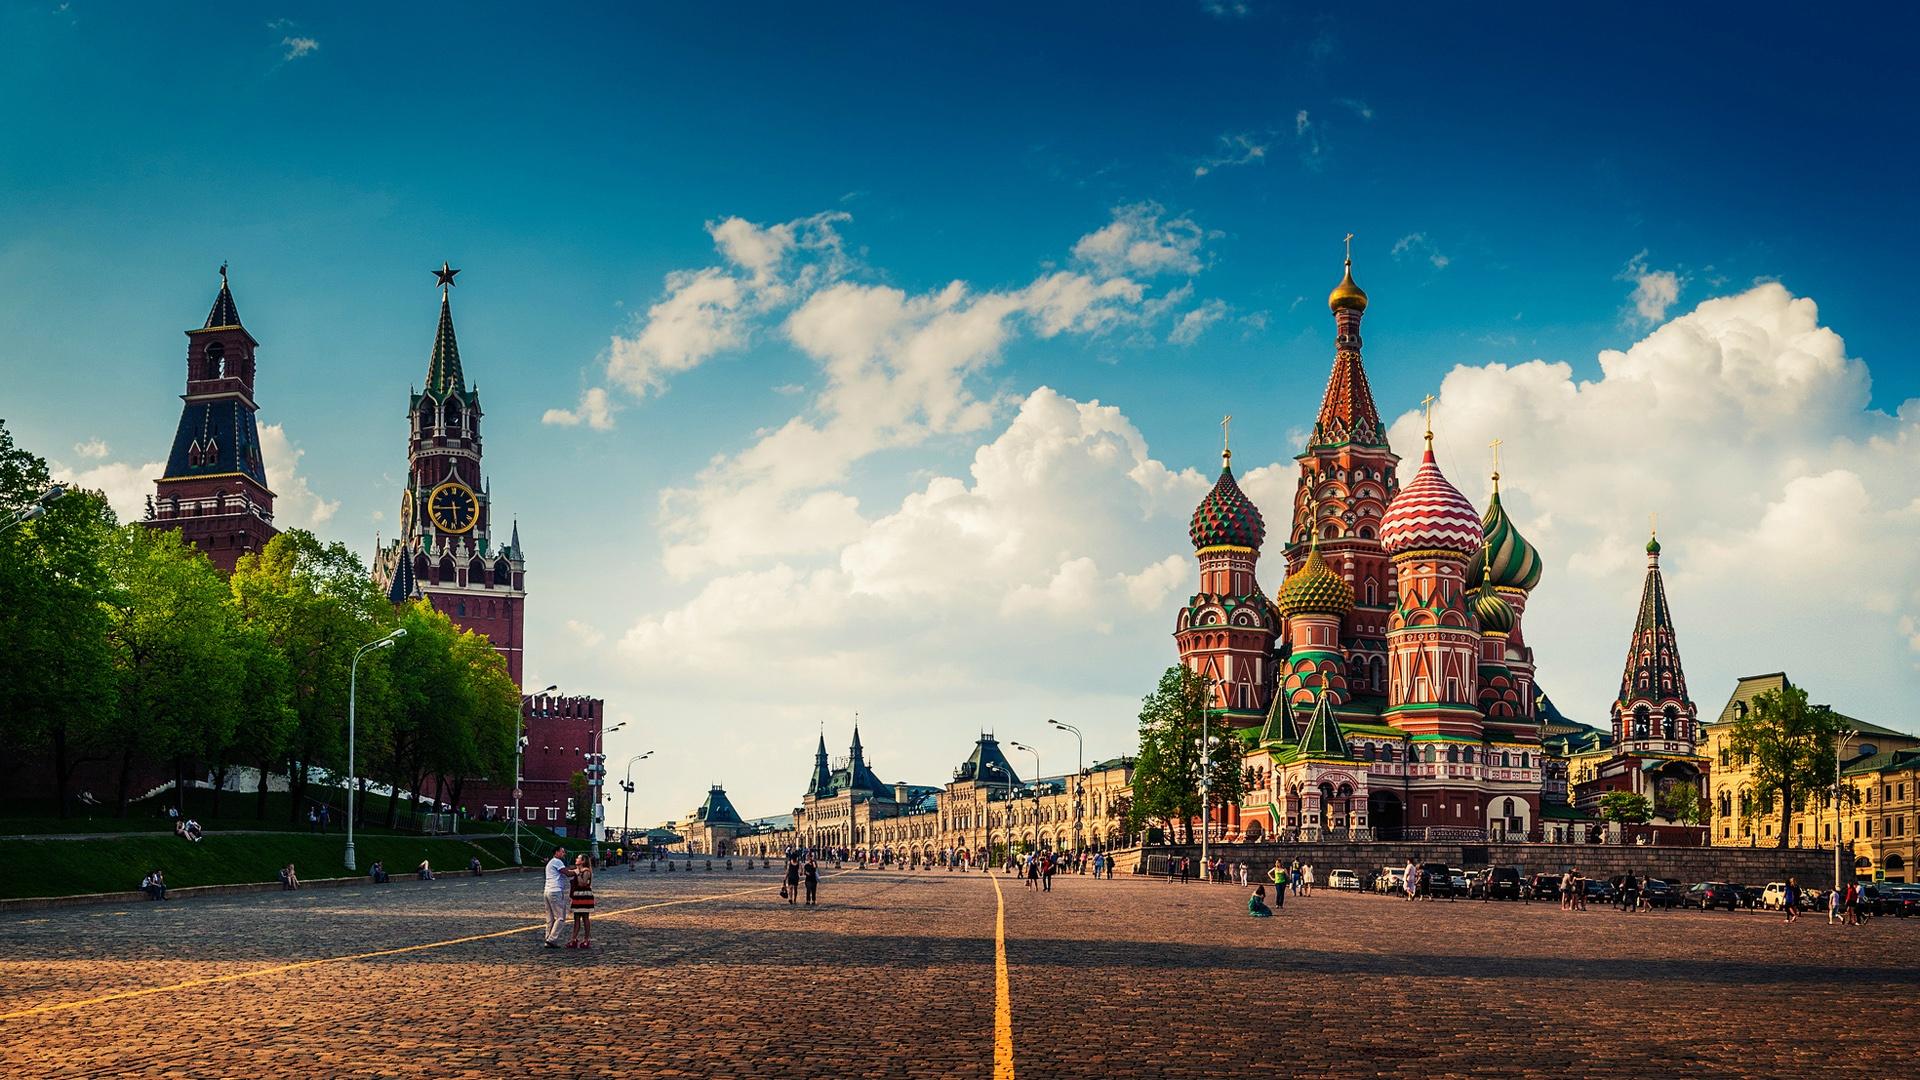 Wallpaper Moscow, Red Square, city landscape 1920x1080 Full HD 2K